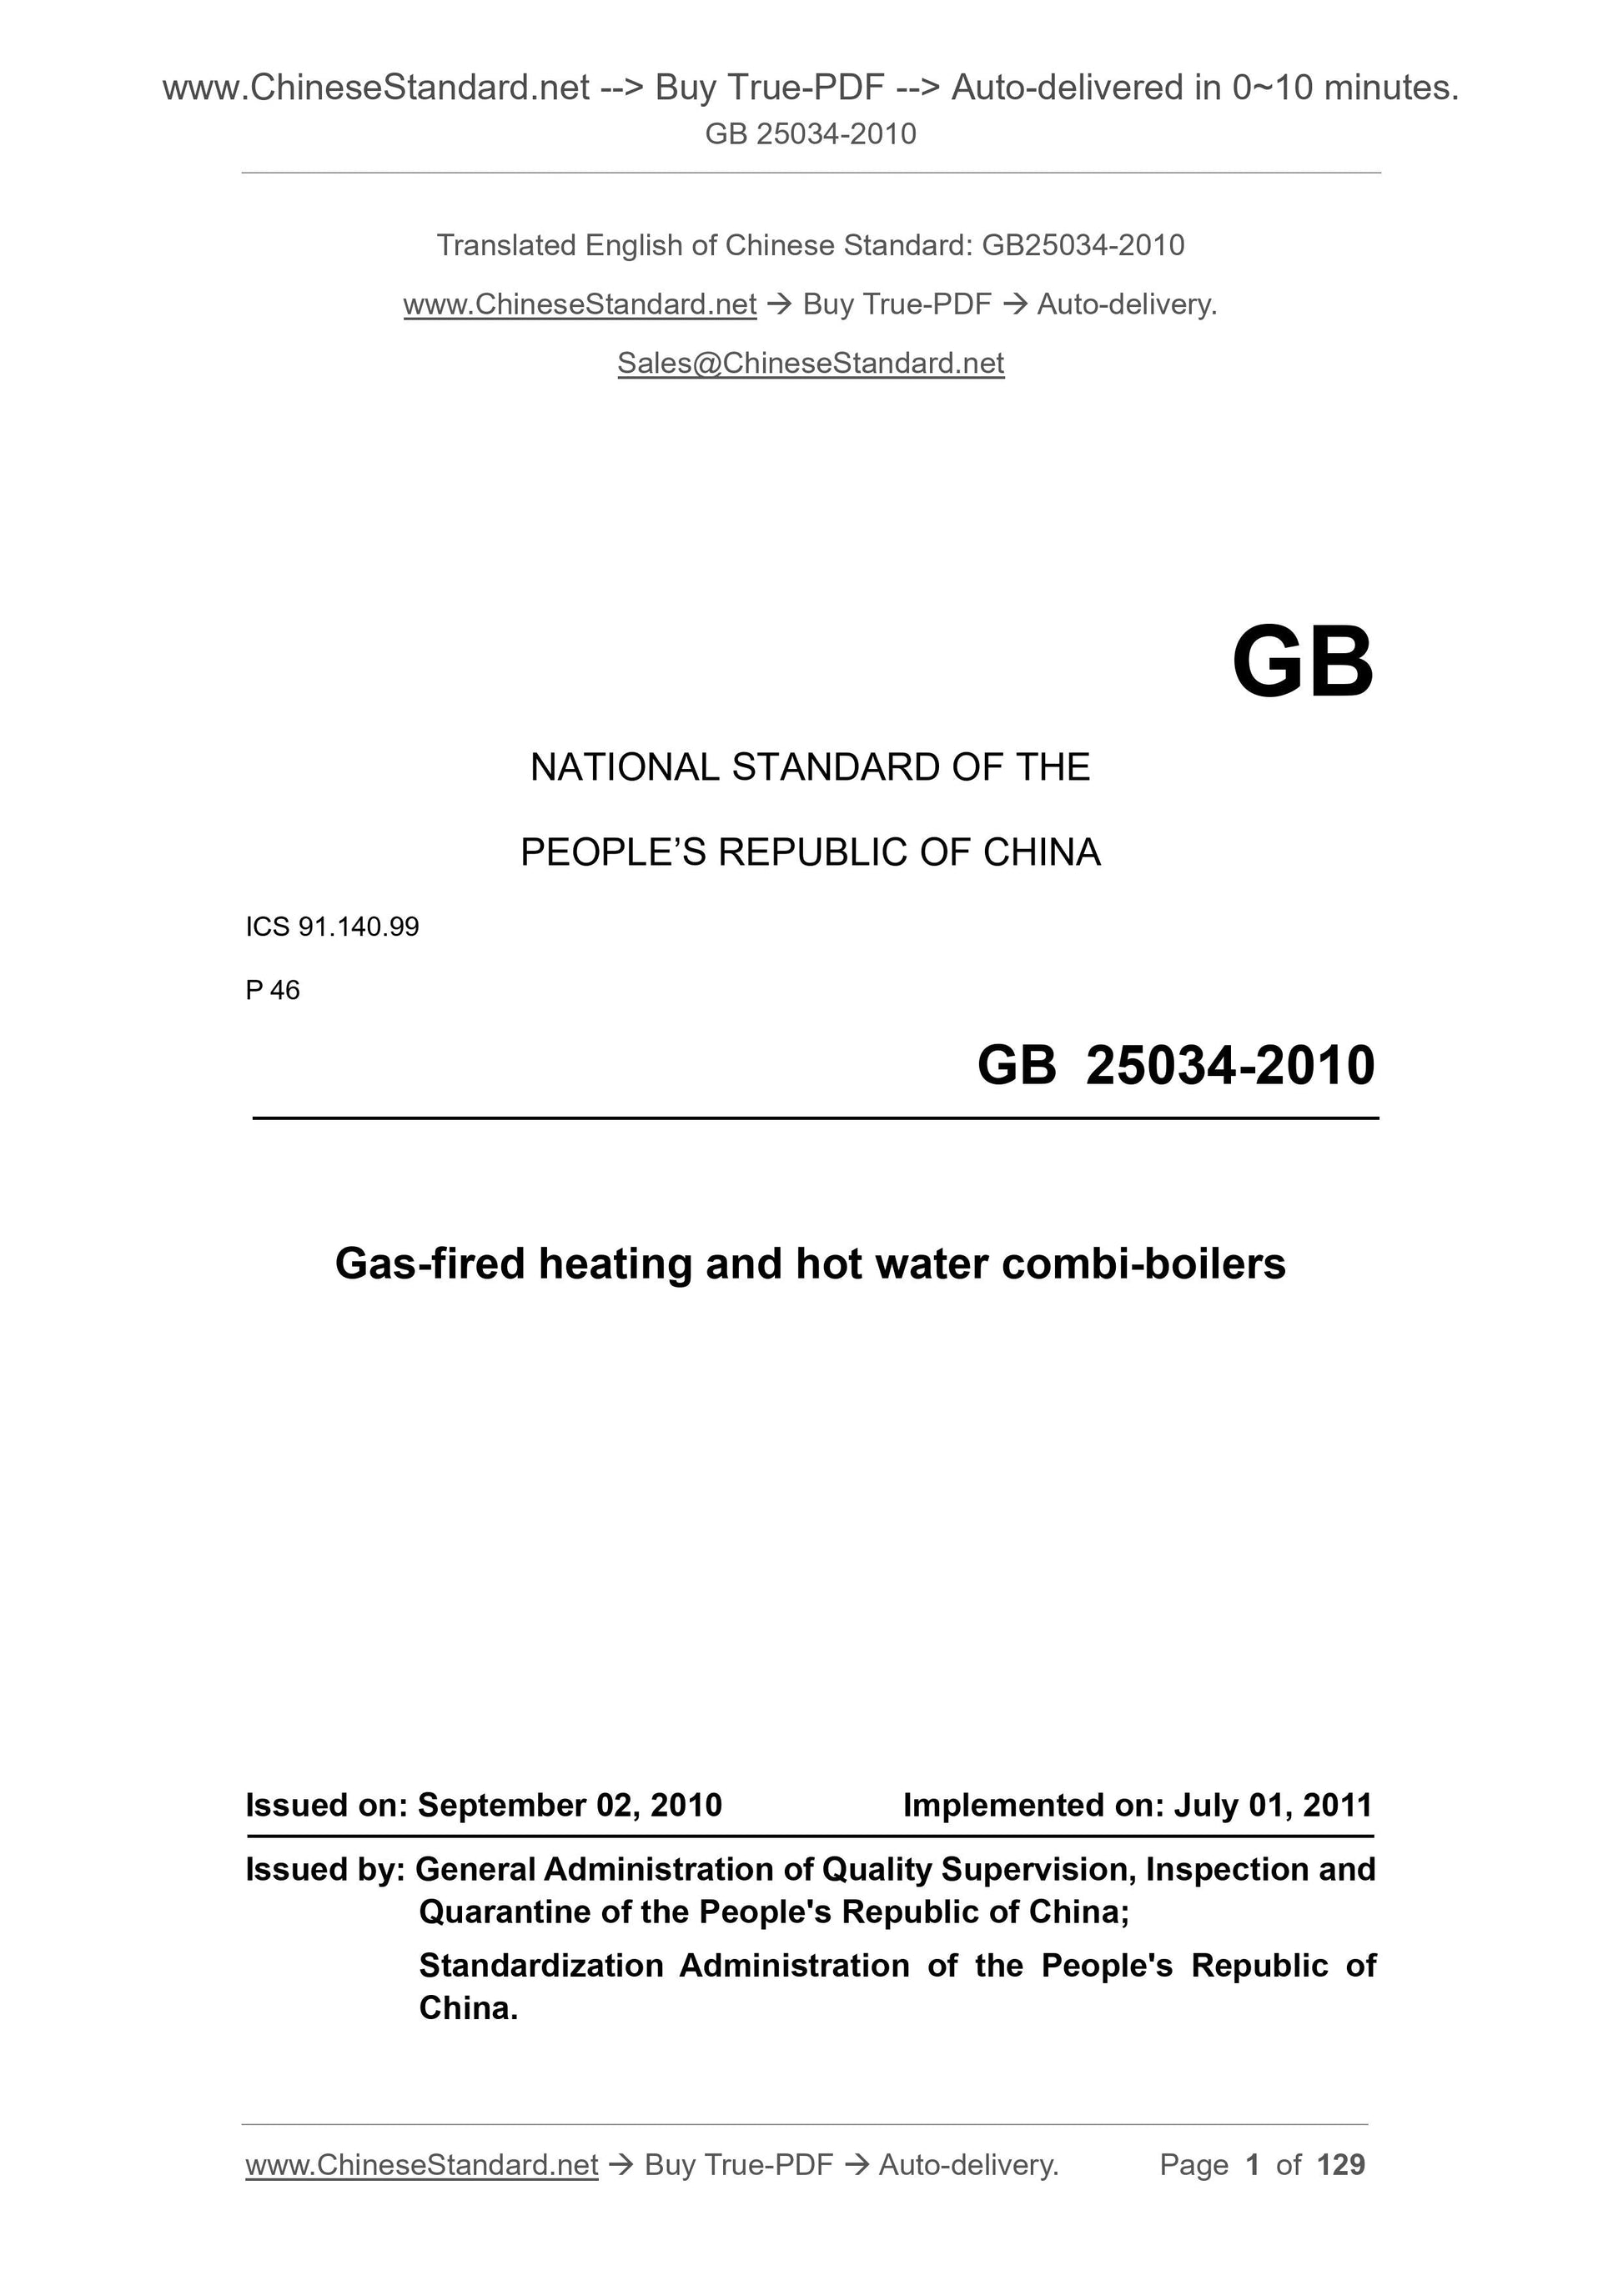 GB 25034-2010 Page 1